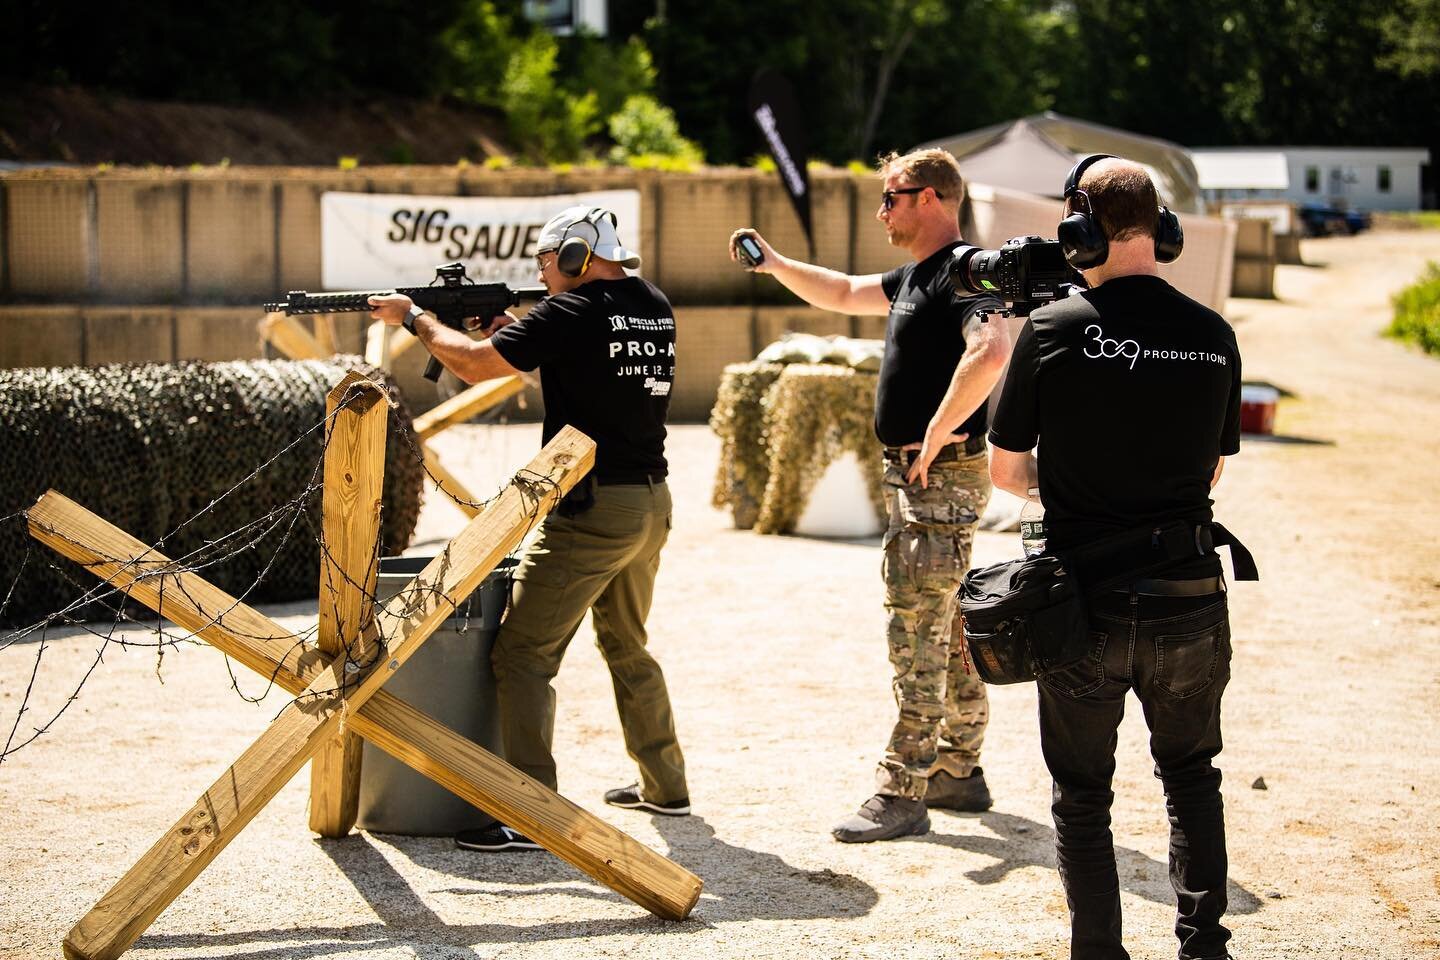 The 309 crew had an action packed day working with the @specialforcesfoundation_ at Sig Sauer Academy!🎖🪖🎥